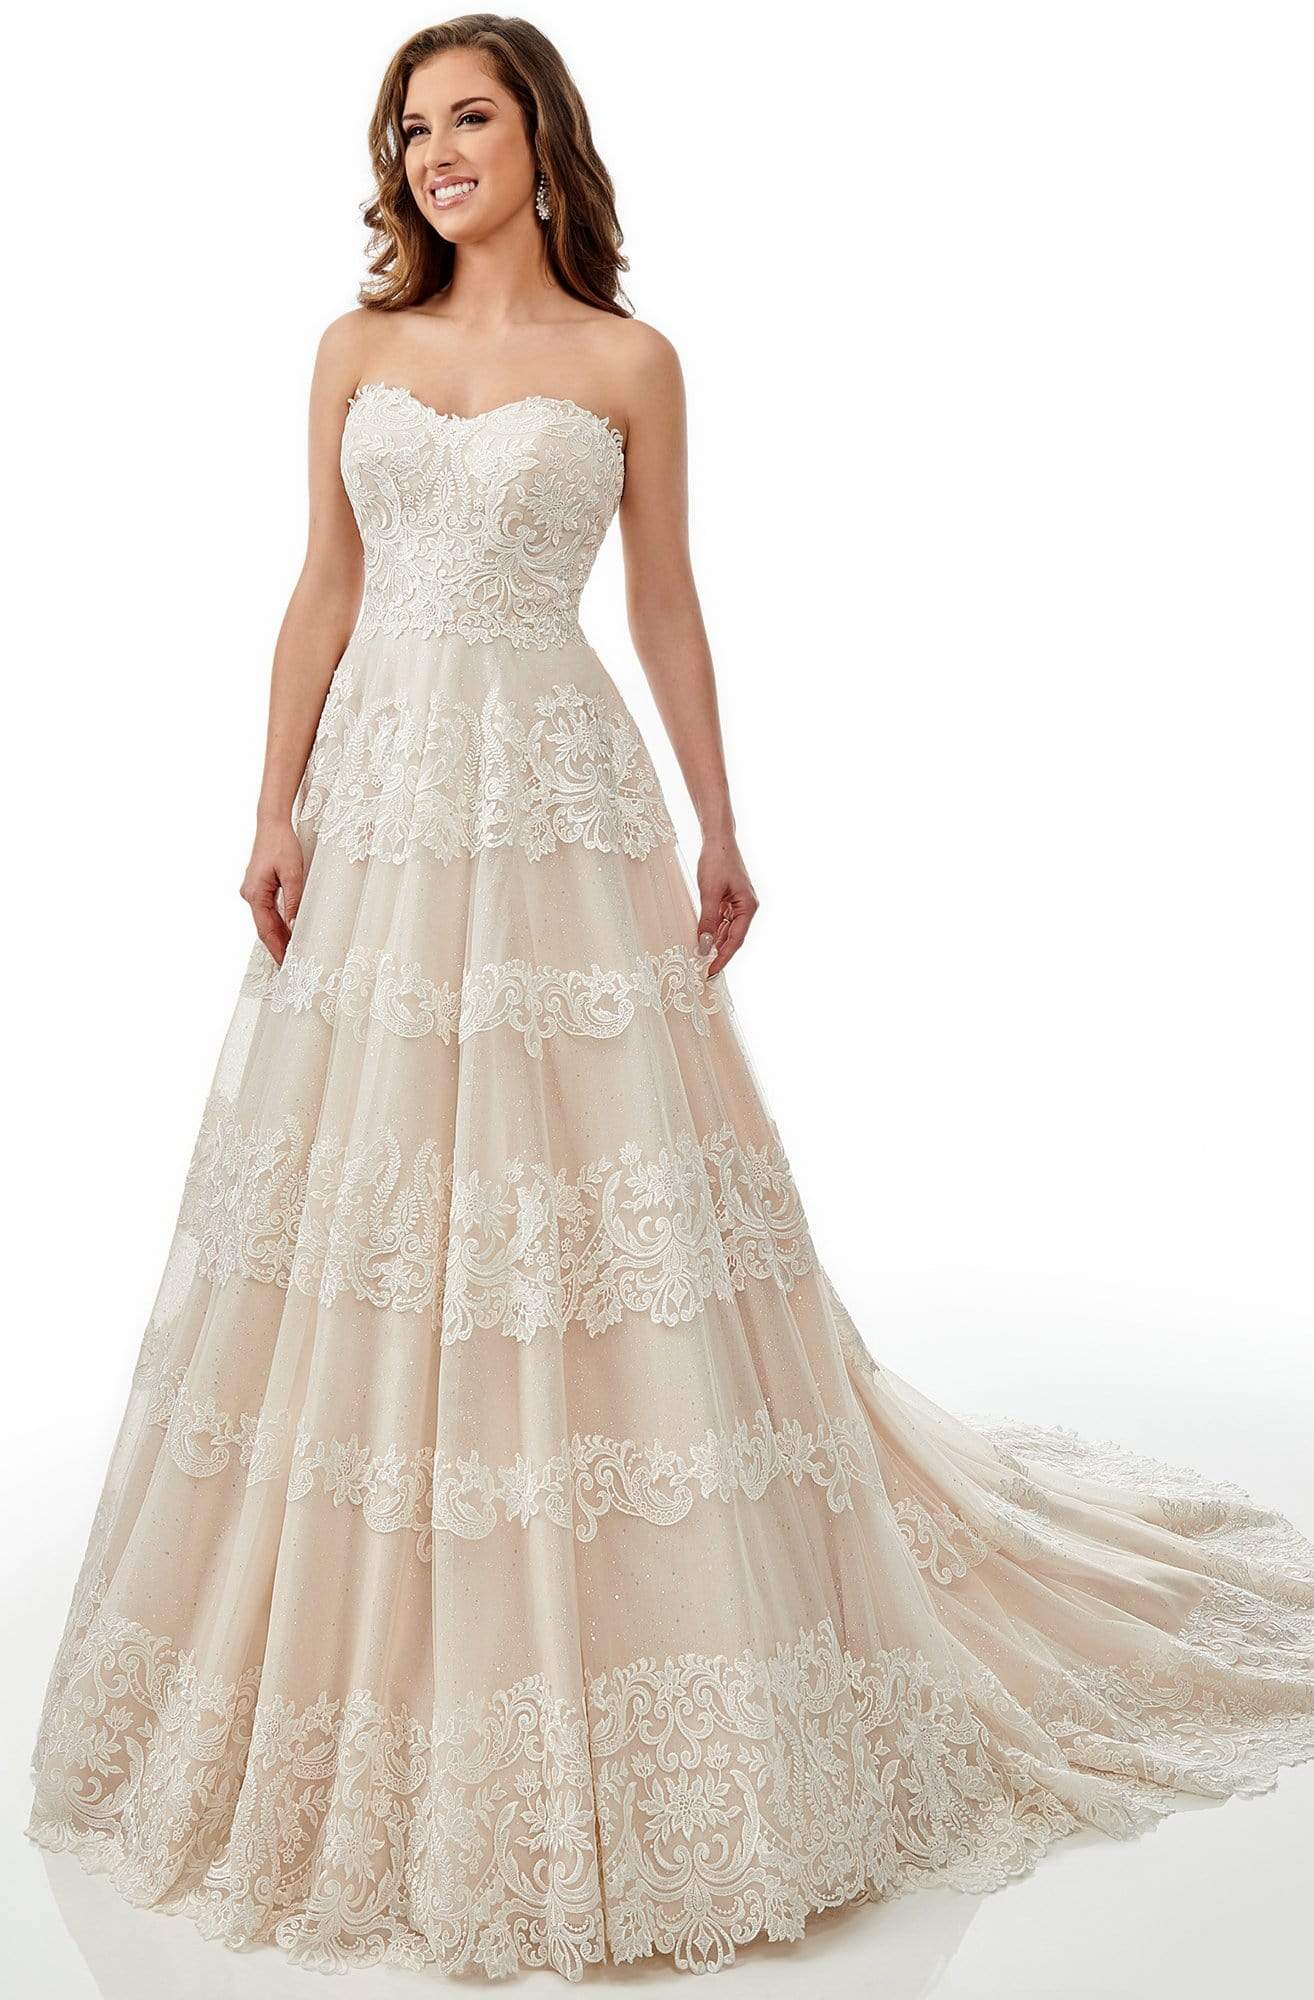 Lo'Adoro Bridal By Rachel Allan - M767 Tiered Lace Sweetheart Gown Wedding Dresses 0 / Ivory Champagne